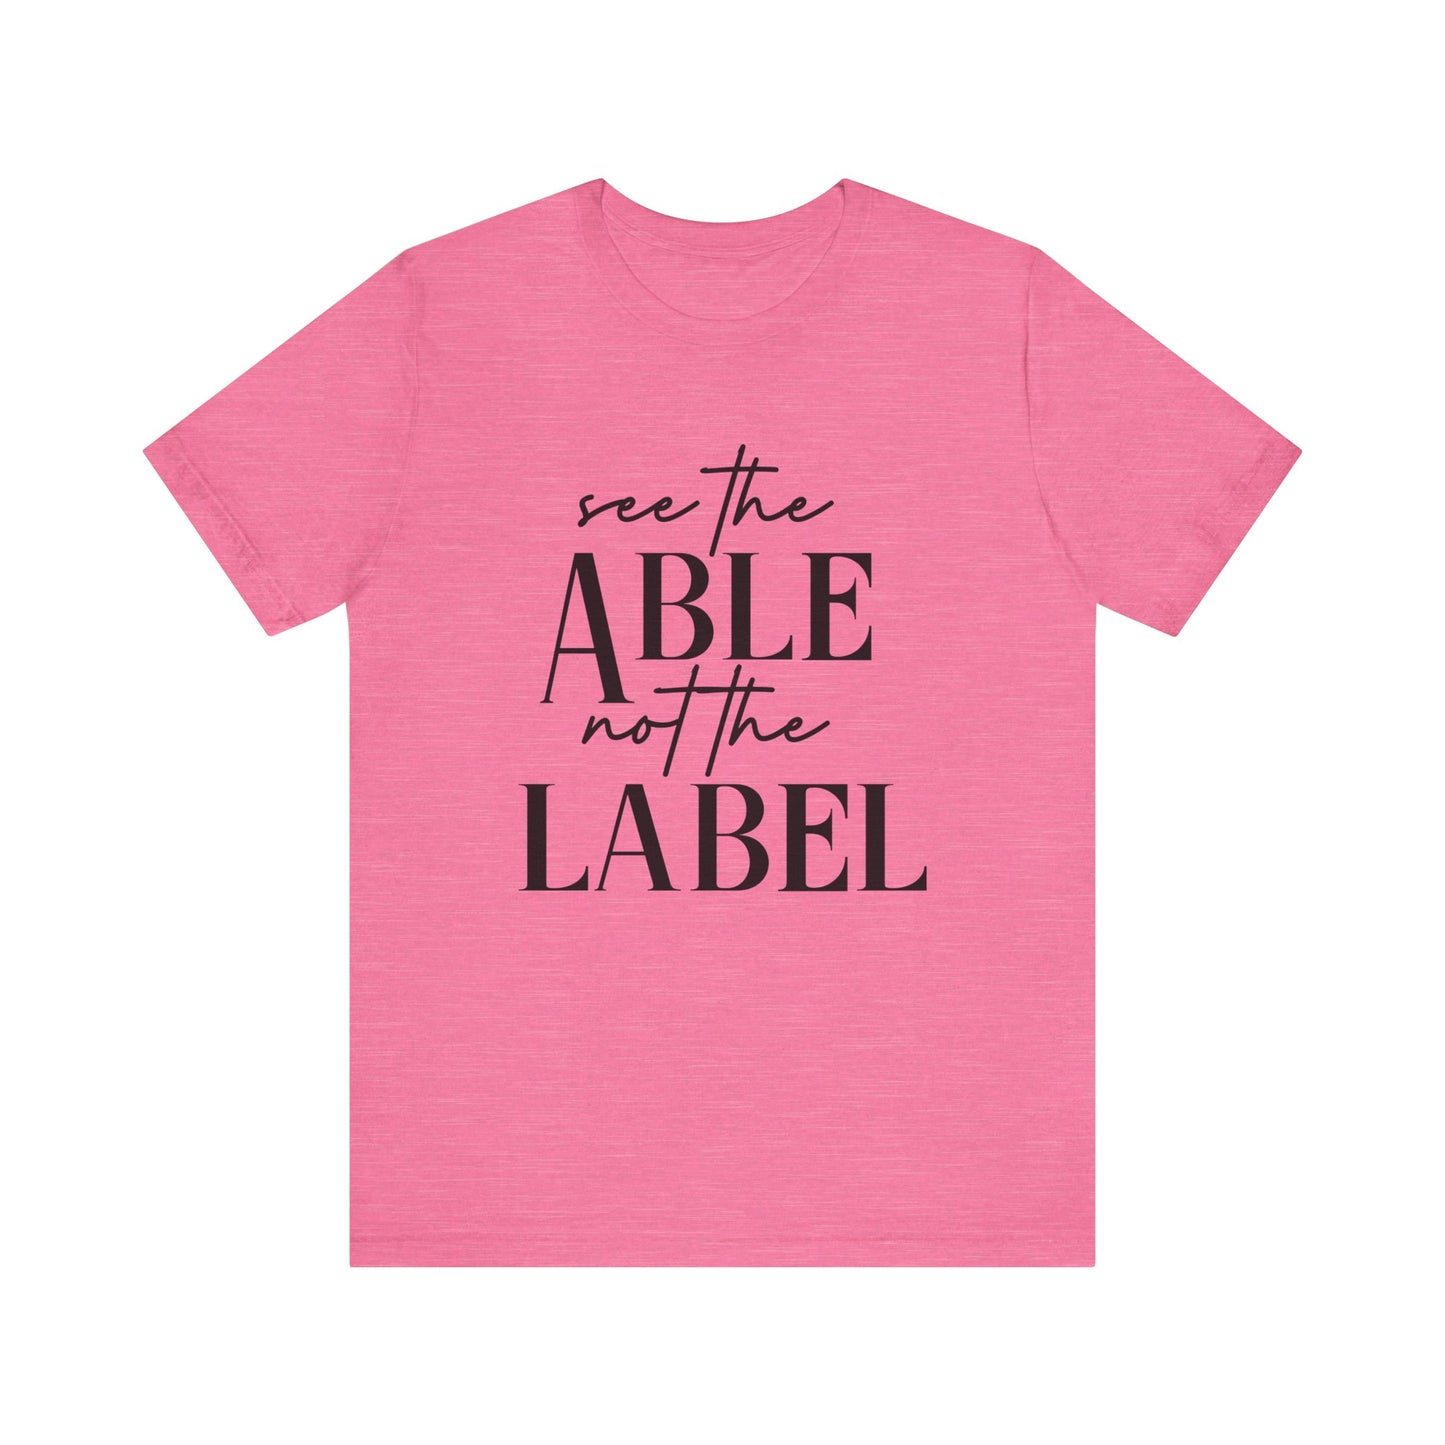 See The Able Not The Label Autism Advocate Shirt Adult Unisex Short Sleeve Tee